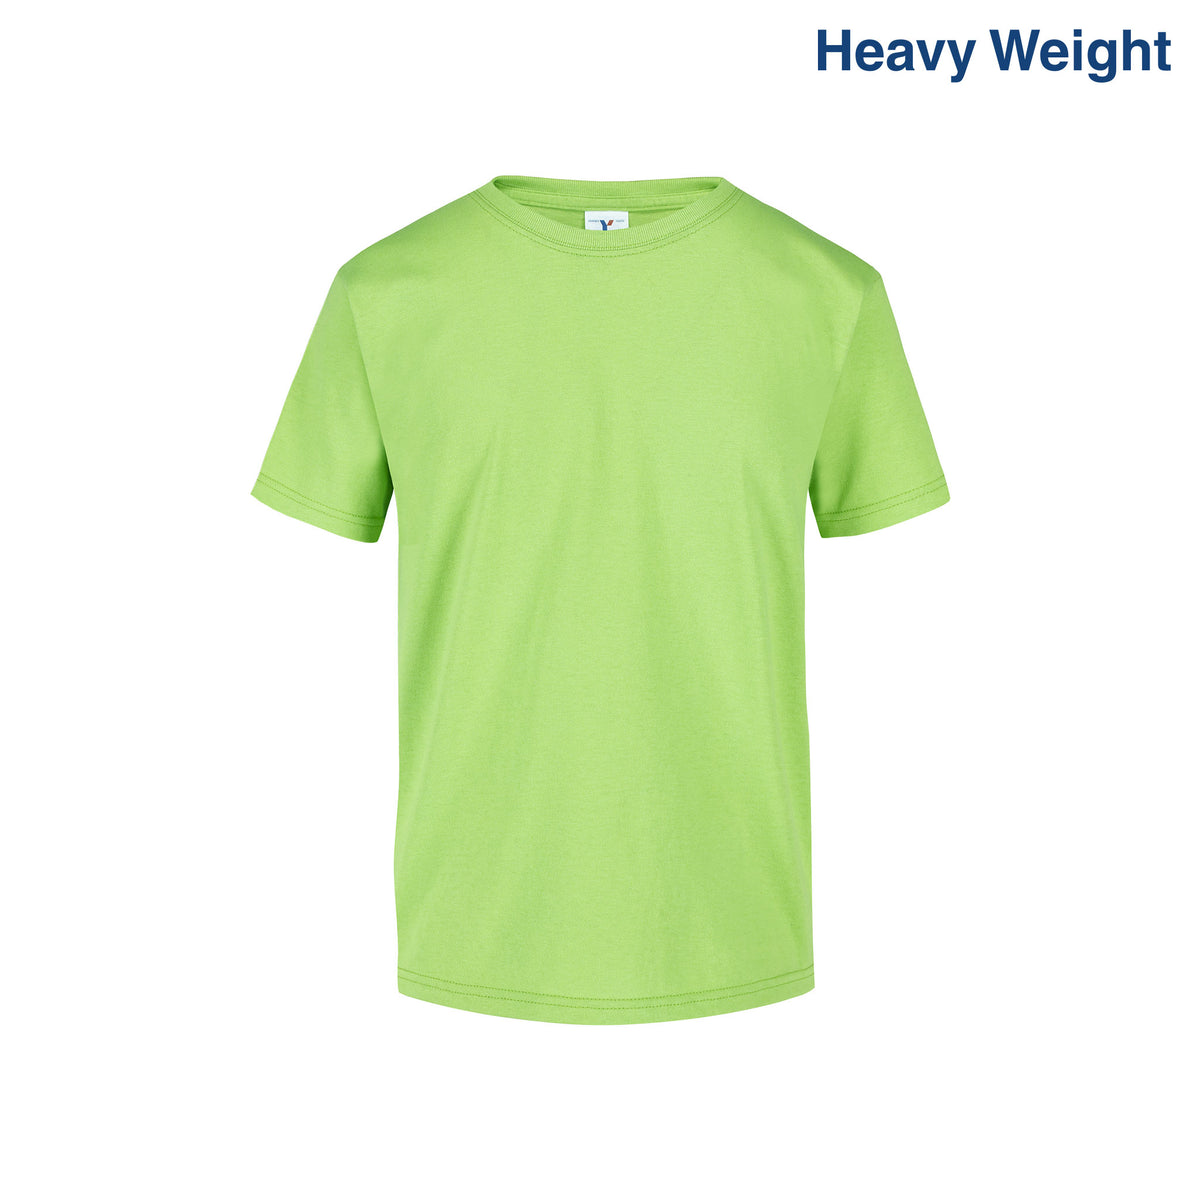 Youth’s Heavy Weight Crew Neck Short Sleeve T-Shirt (Lime)